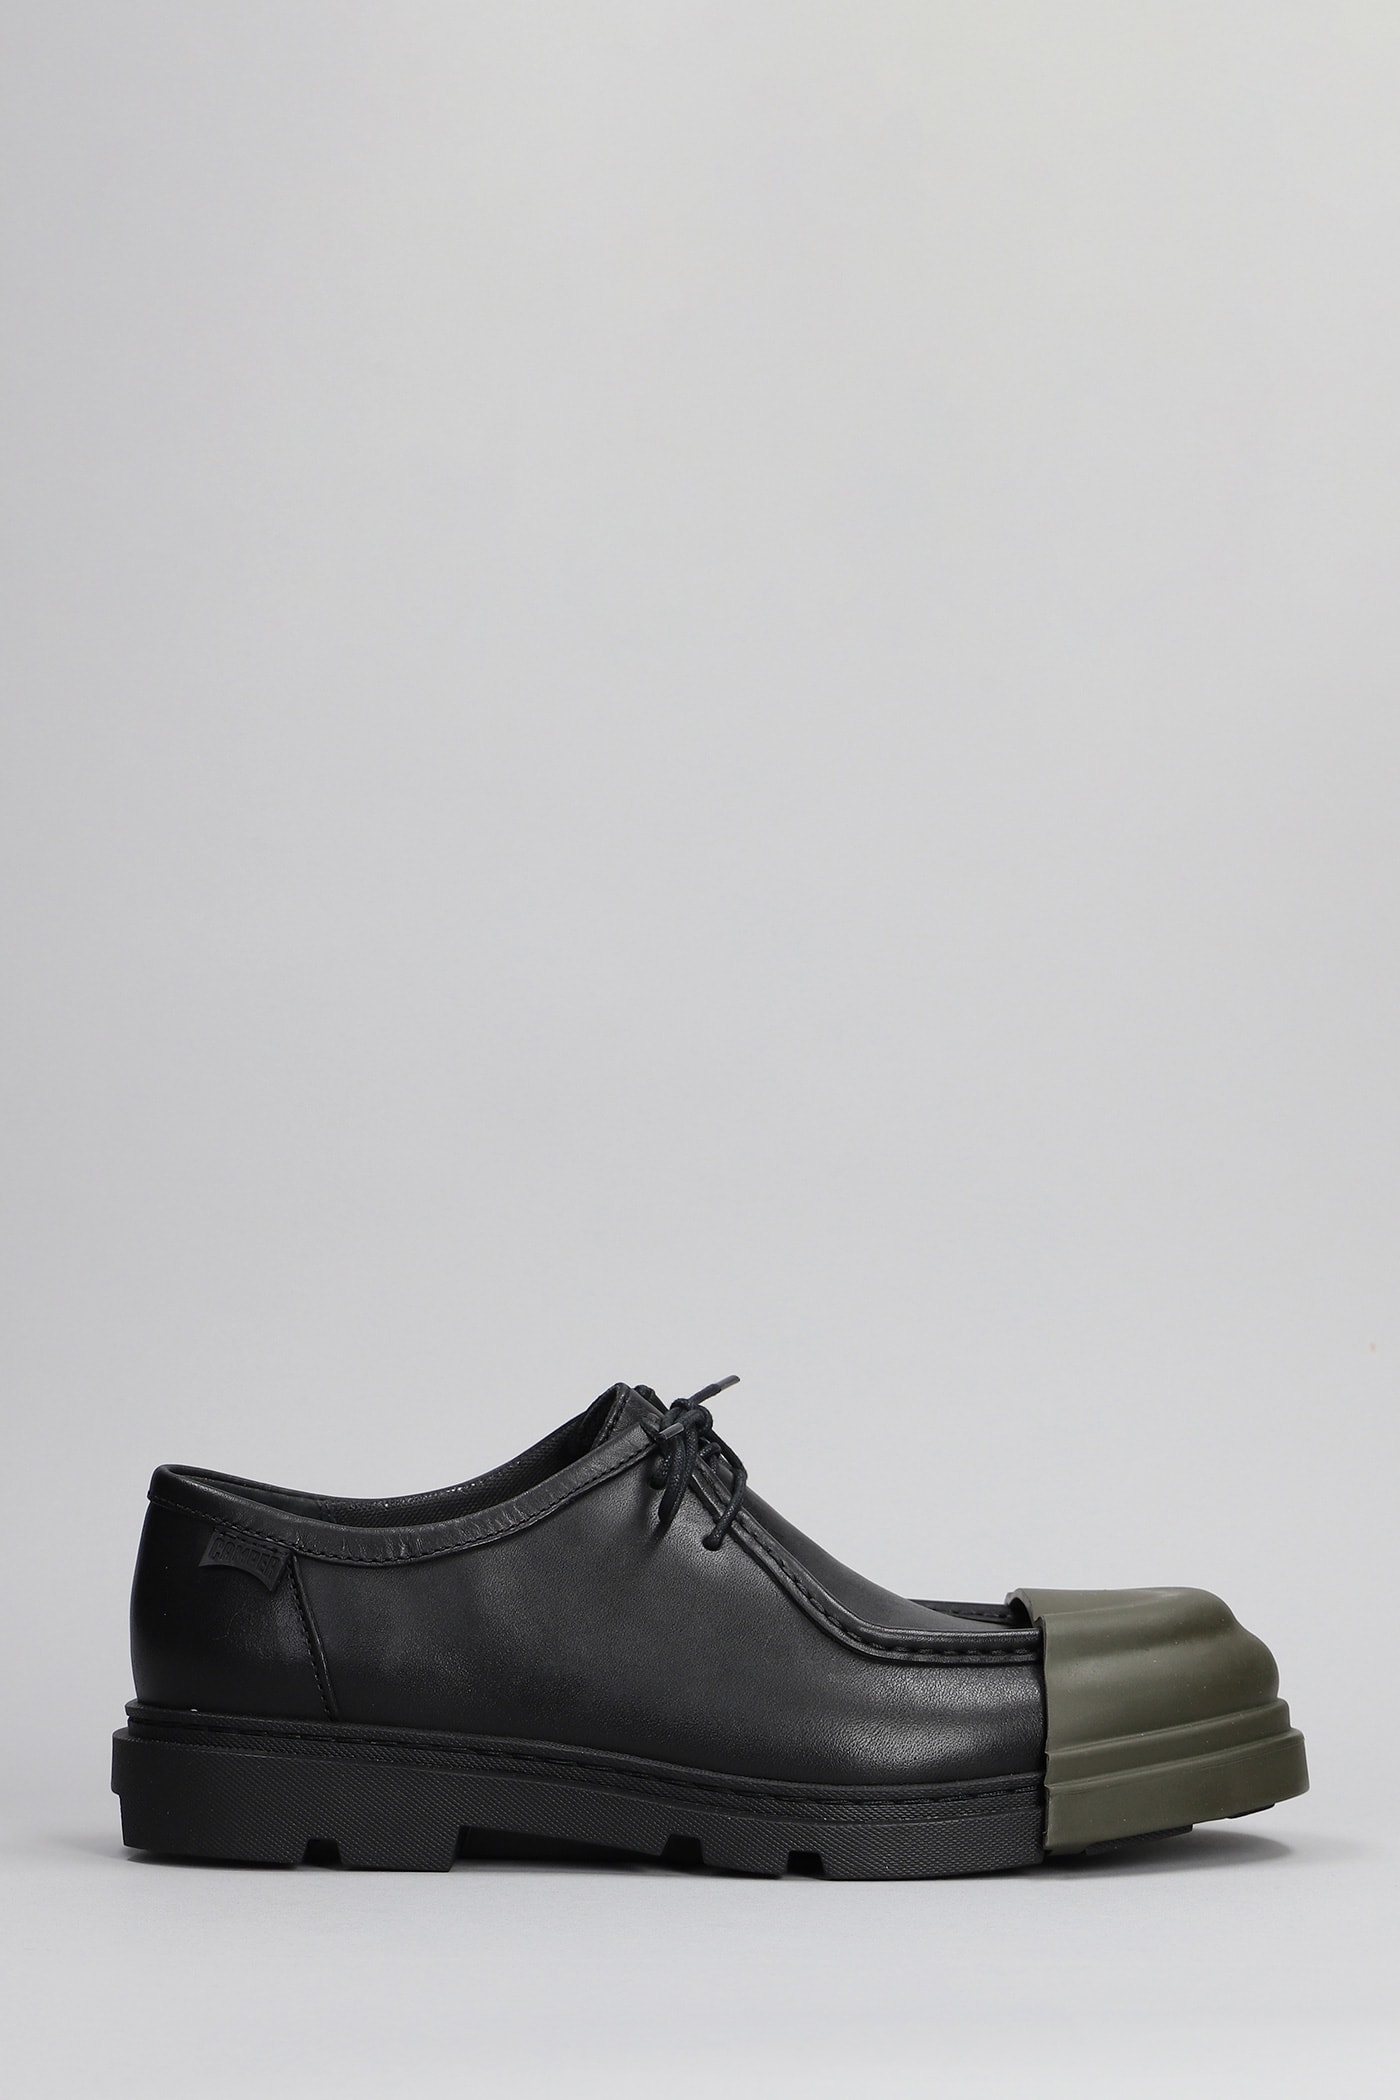 CAMPER JUNCTION LACE UP SHOES IN BLACK LEATHER